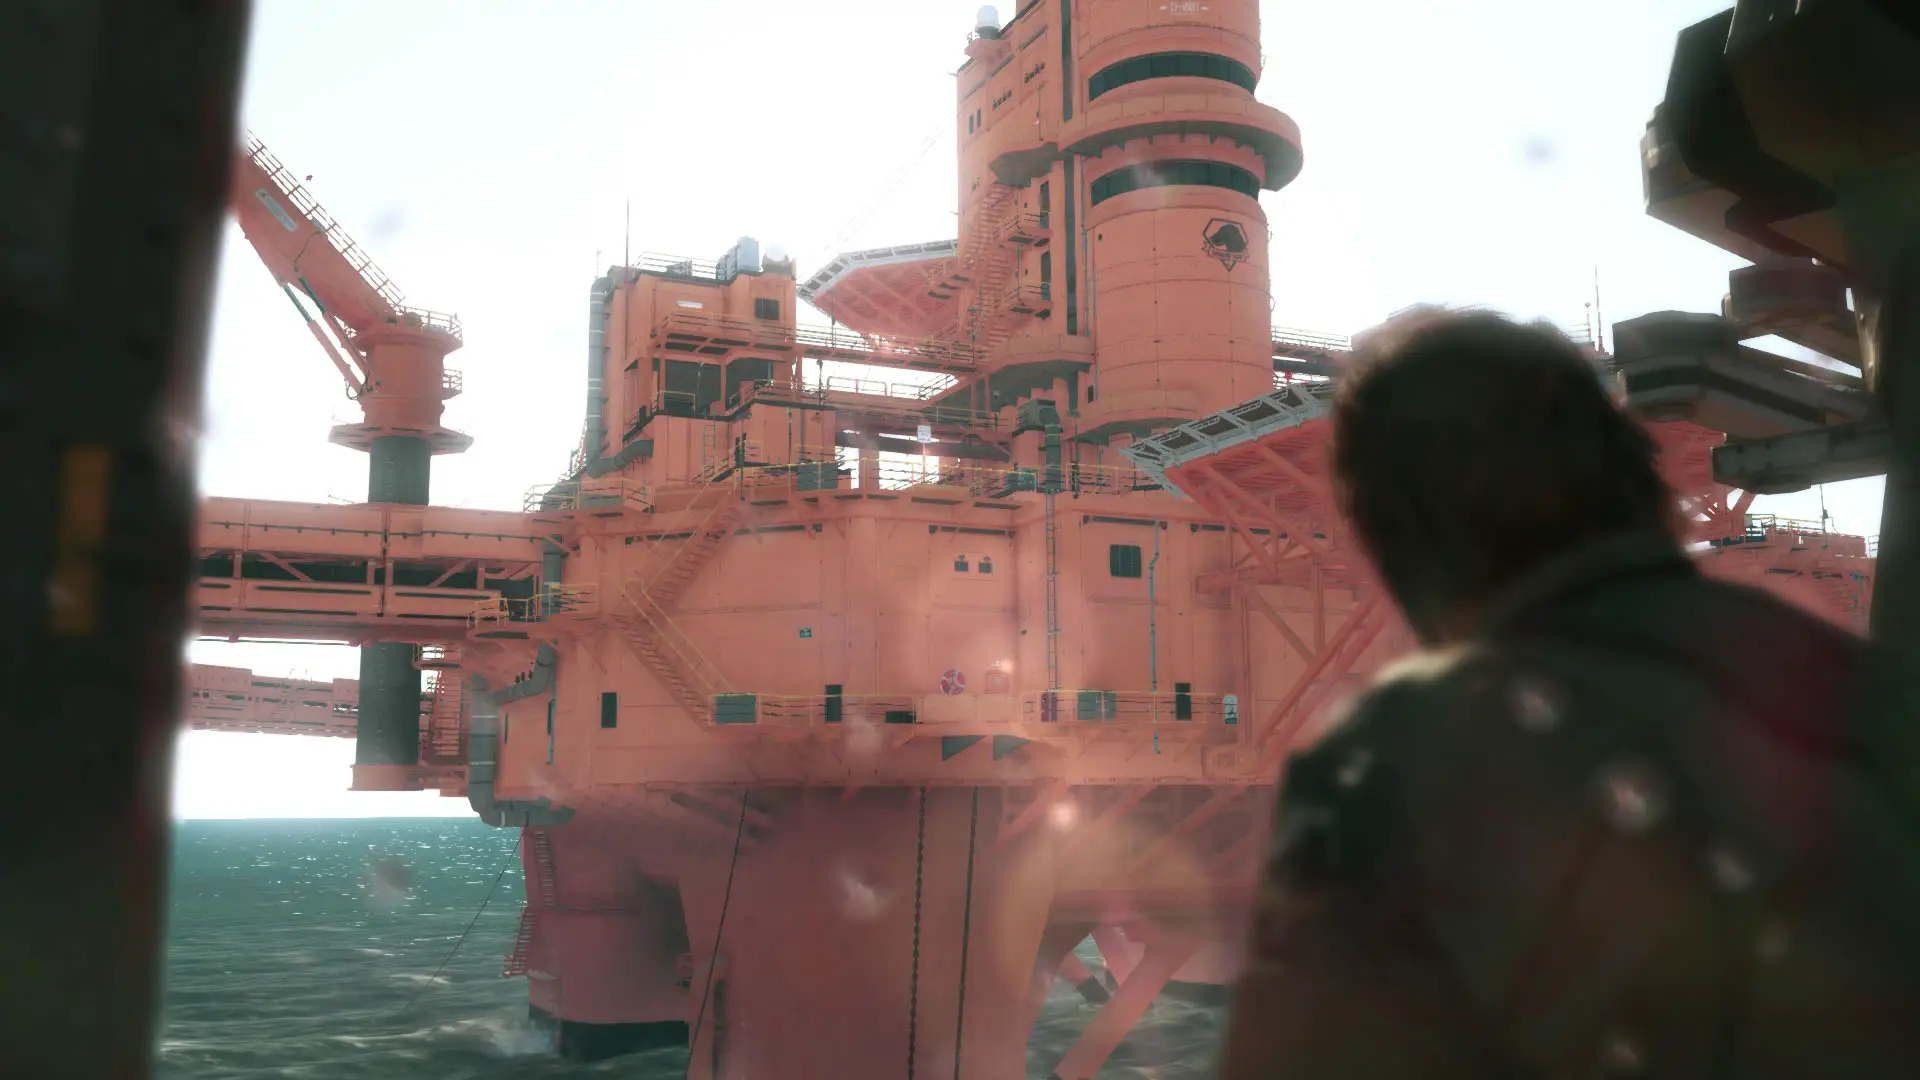 Metal-Gear-Solid-V-The-Phantom-Pain-E3-2015-Screen-Mother-Base-from-Helicopter